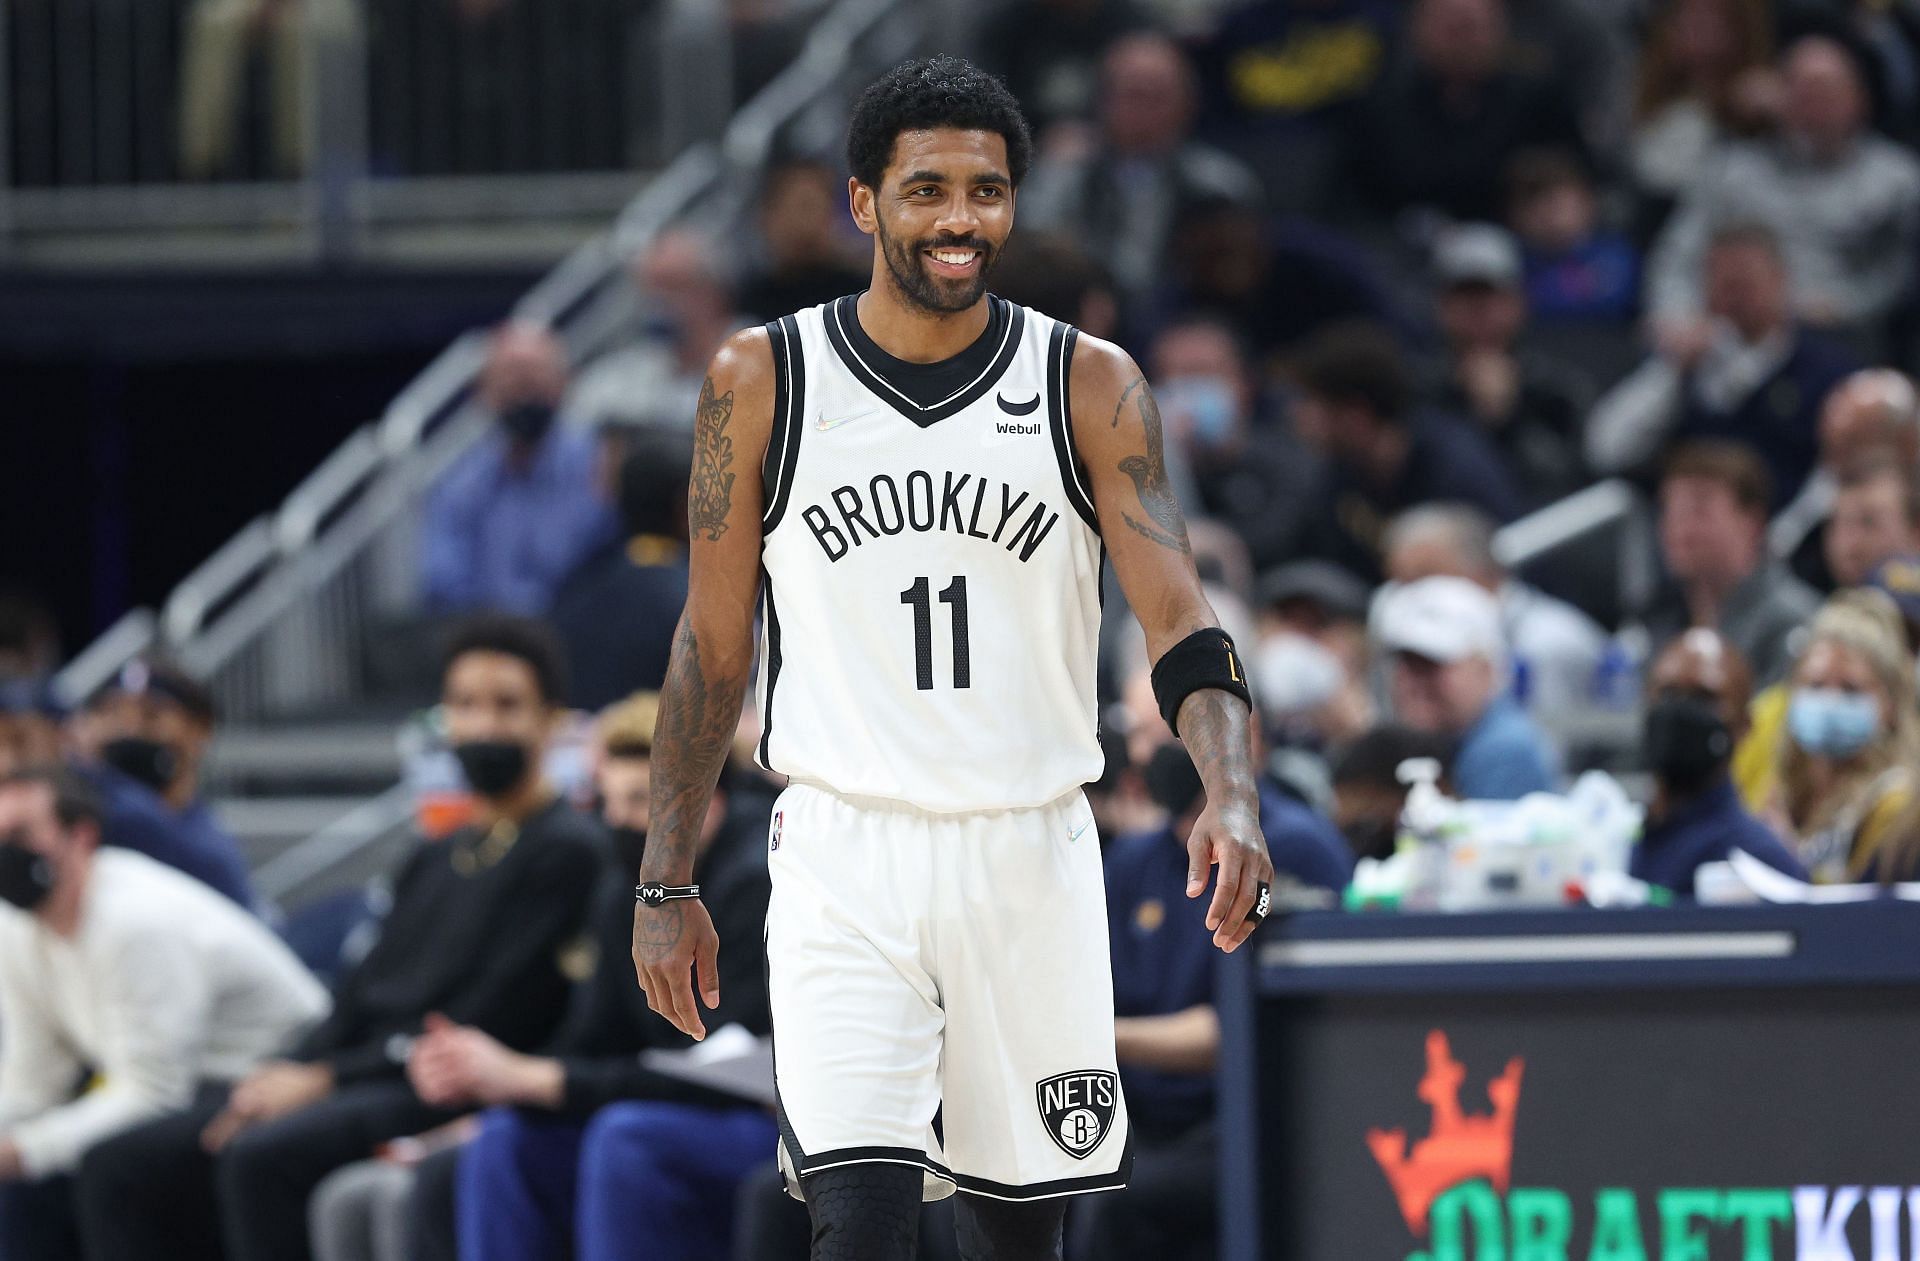 Kyrie Irving #11of the Brooklyn Nets